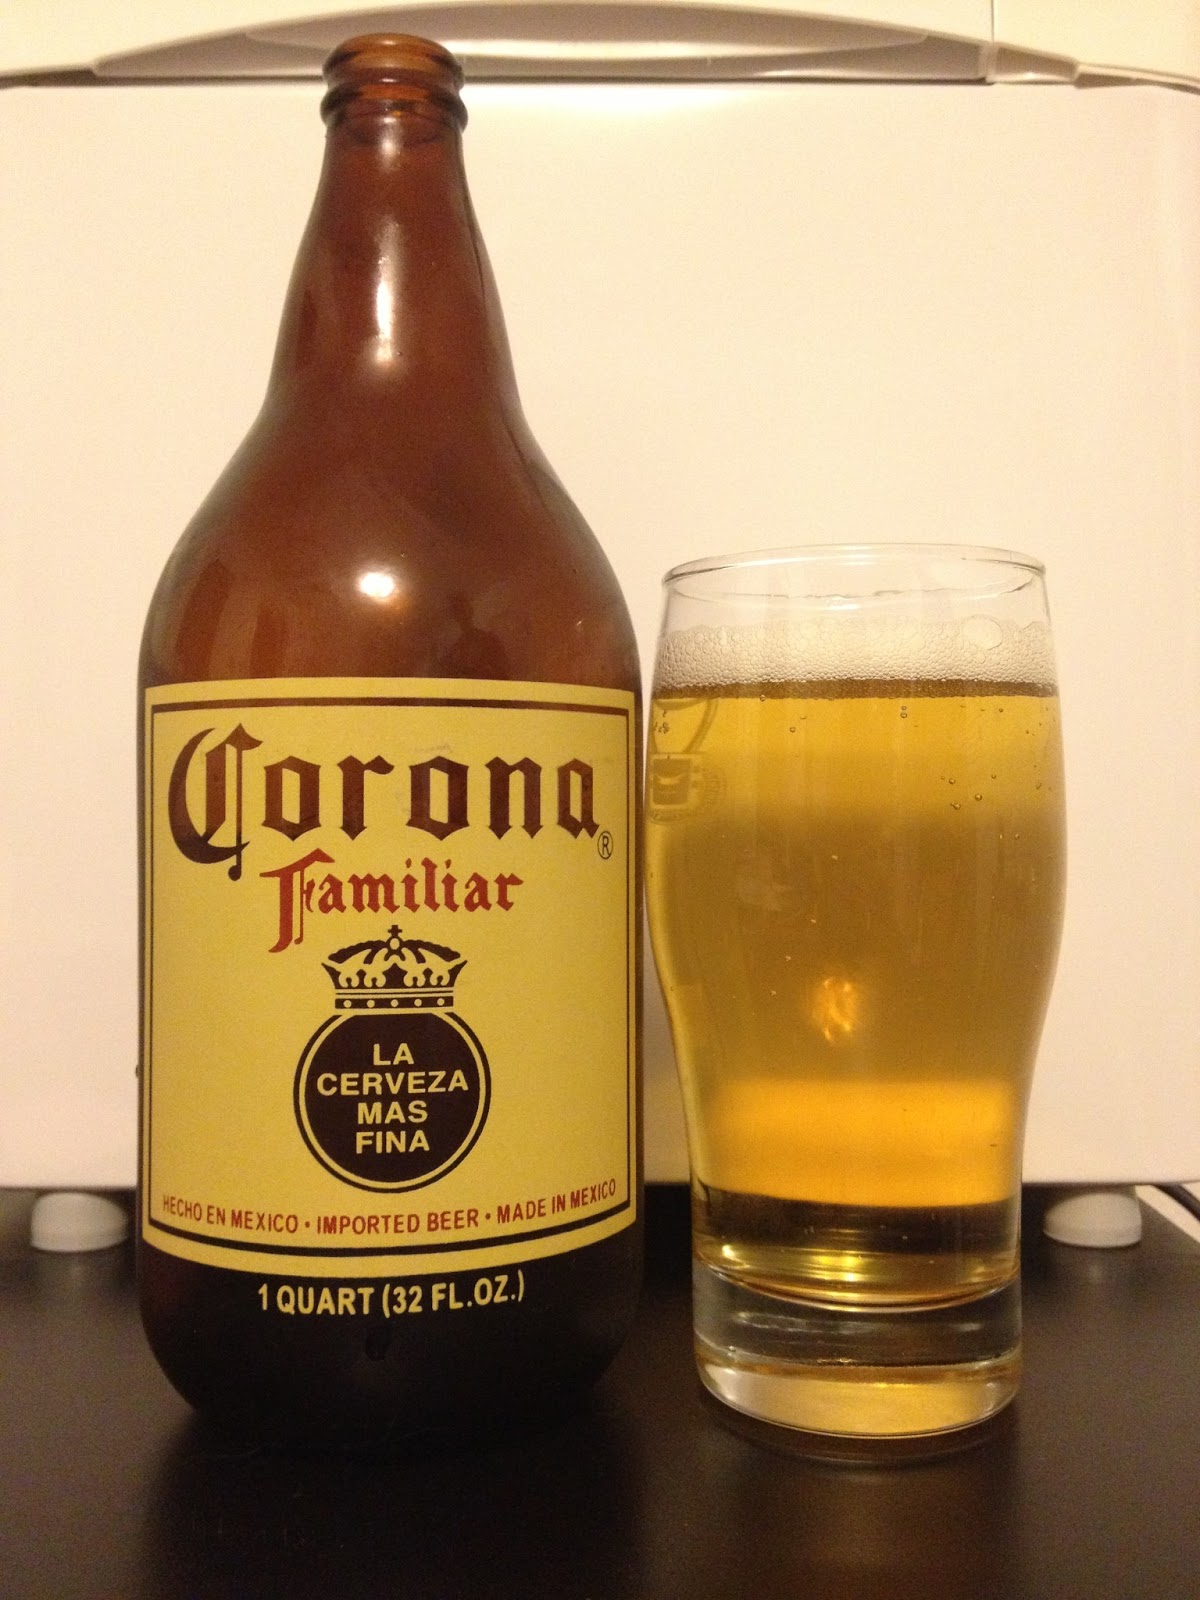 Favorite beer from Mexico? - Page 2 - AR15.COM